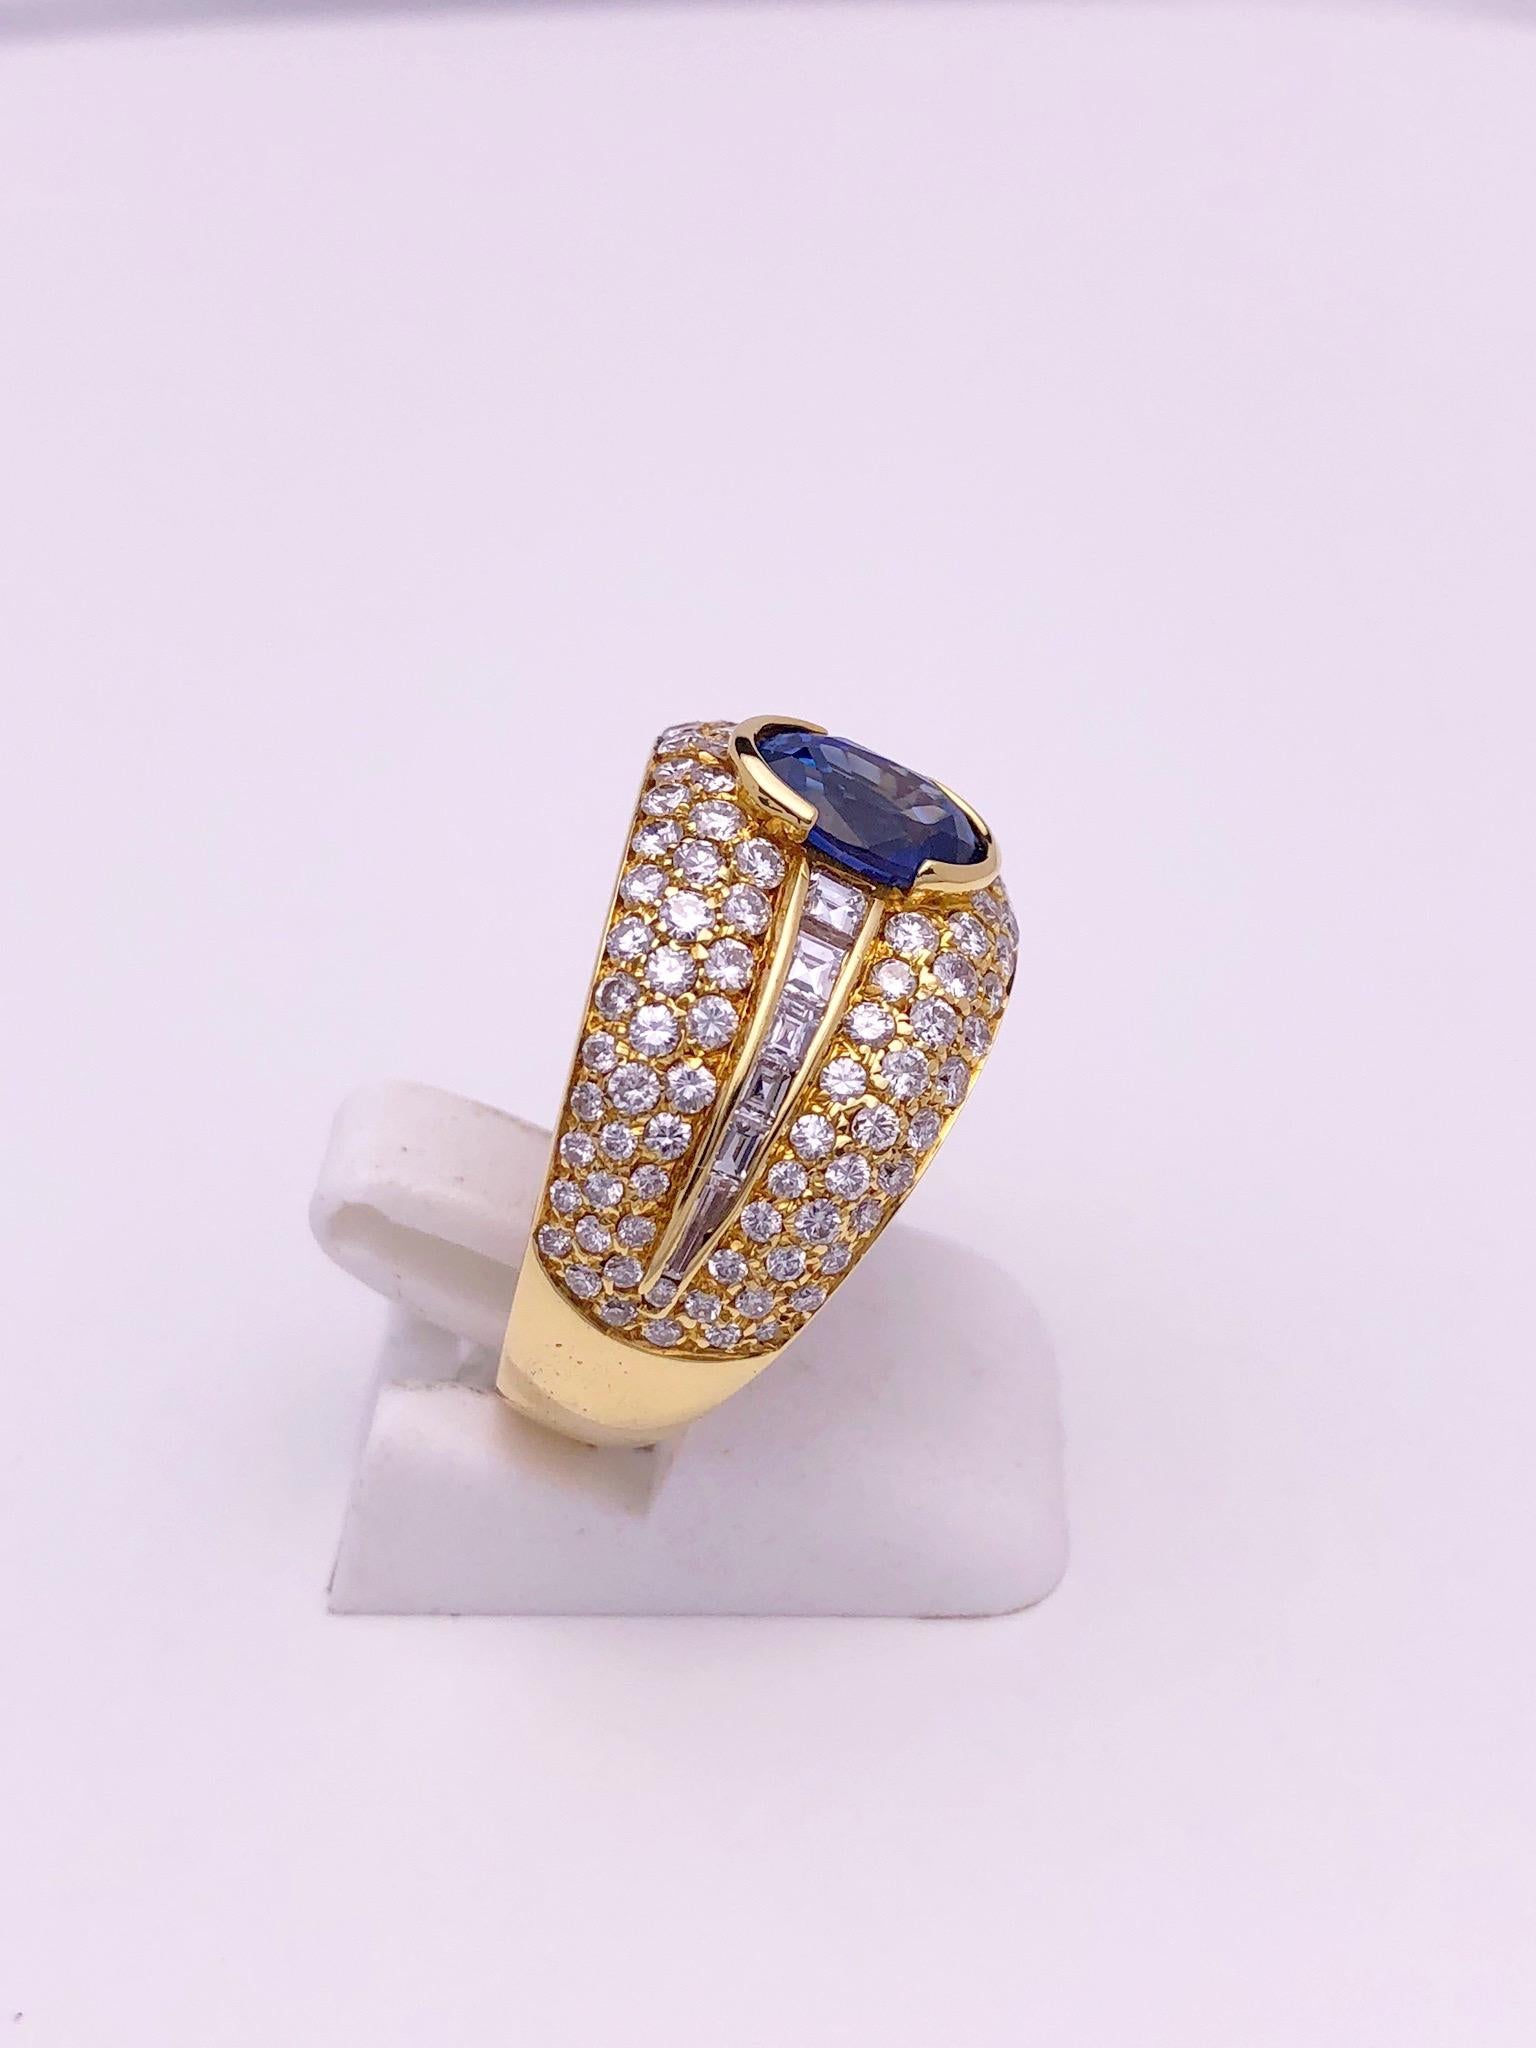 Oval Cut 18 Karat Yellow Gold Diamond Ring with 1.47 Carat Oval Blue Sapphire Center For Sale